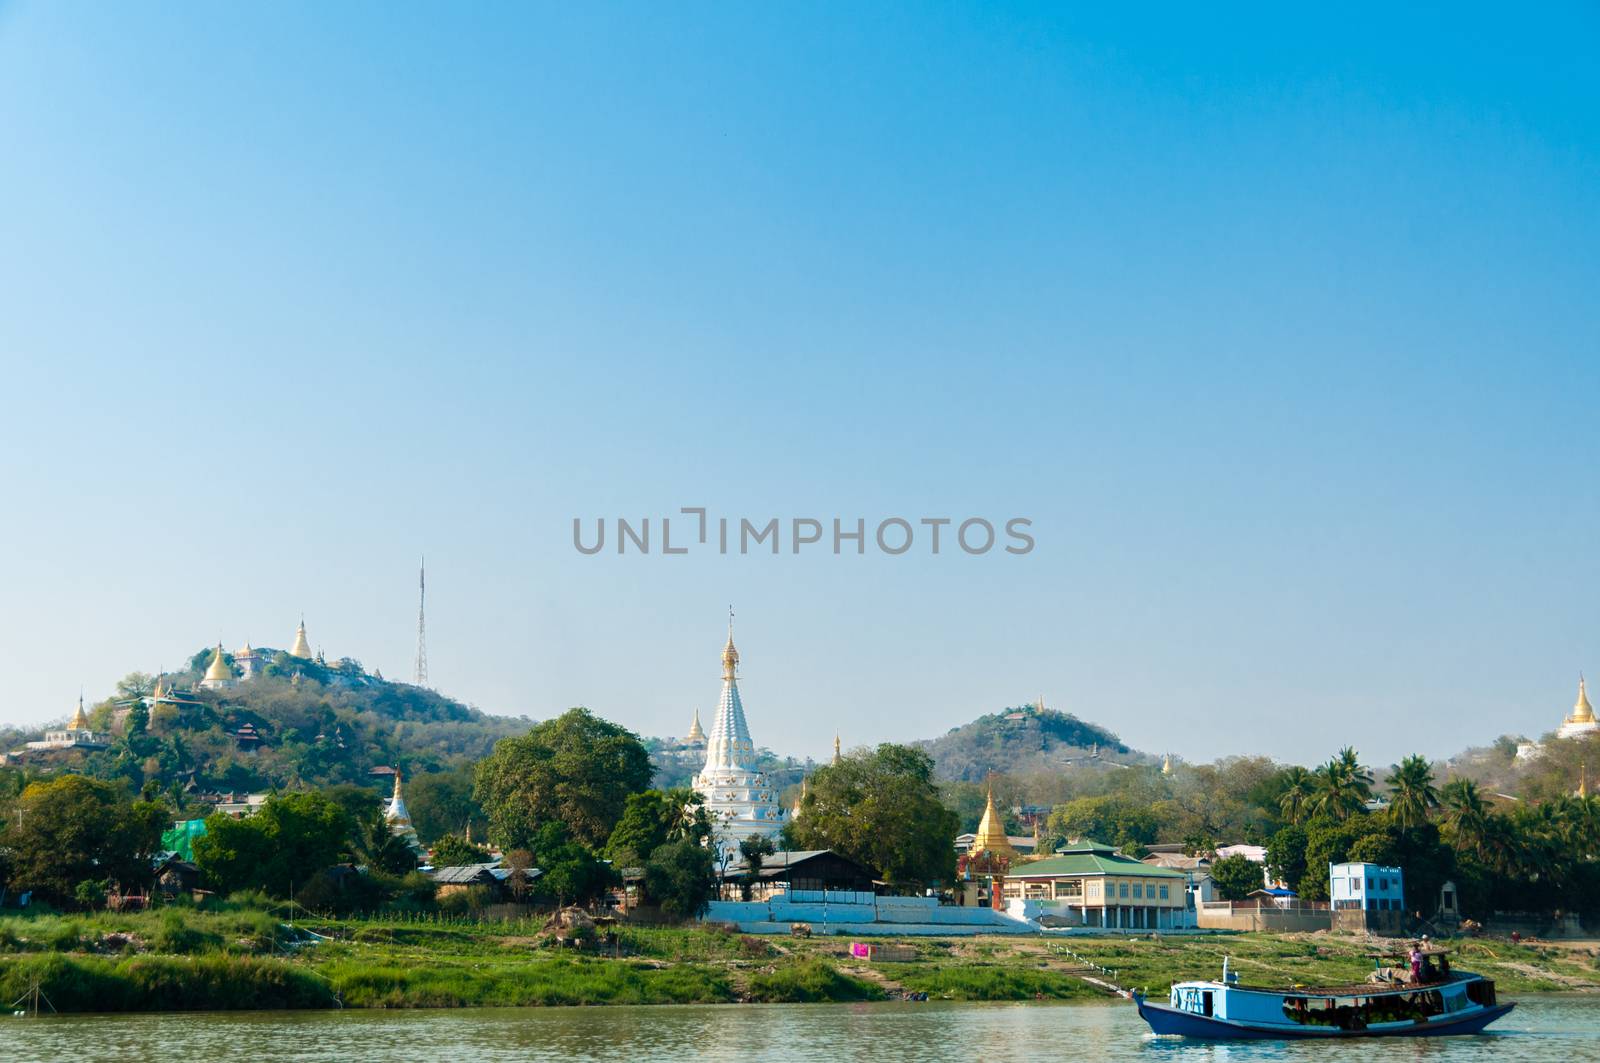 Boat on Irrawaddy river with Pagoda and village close to Mandalay Burma Myanmar